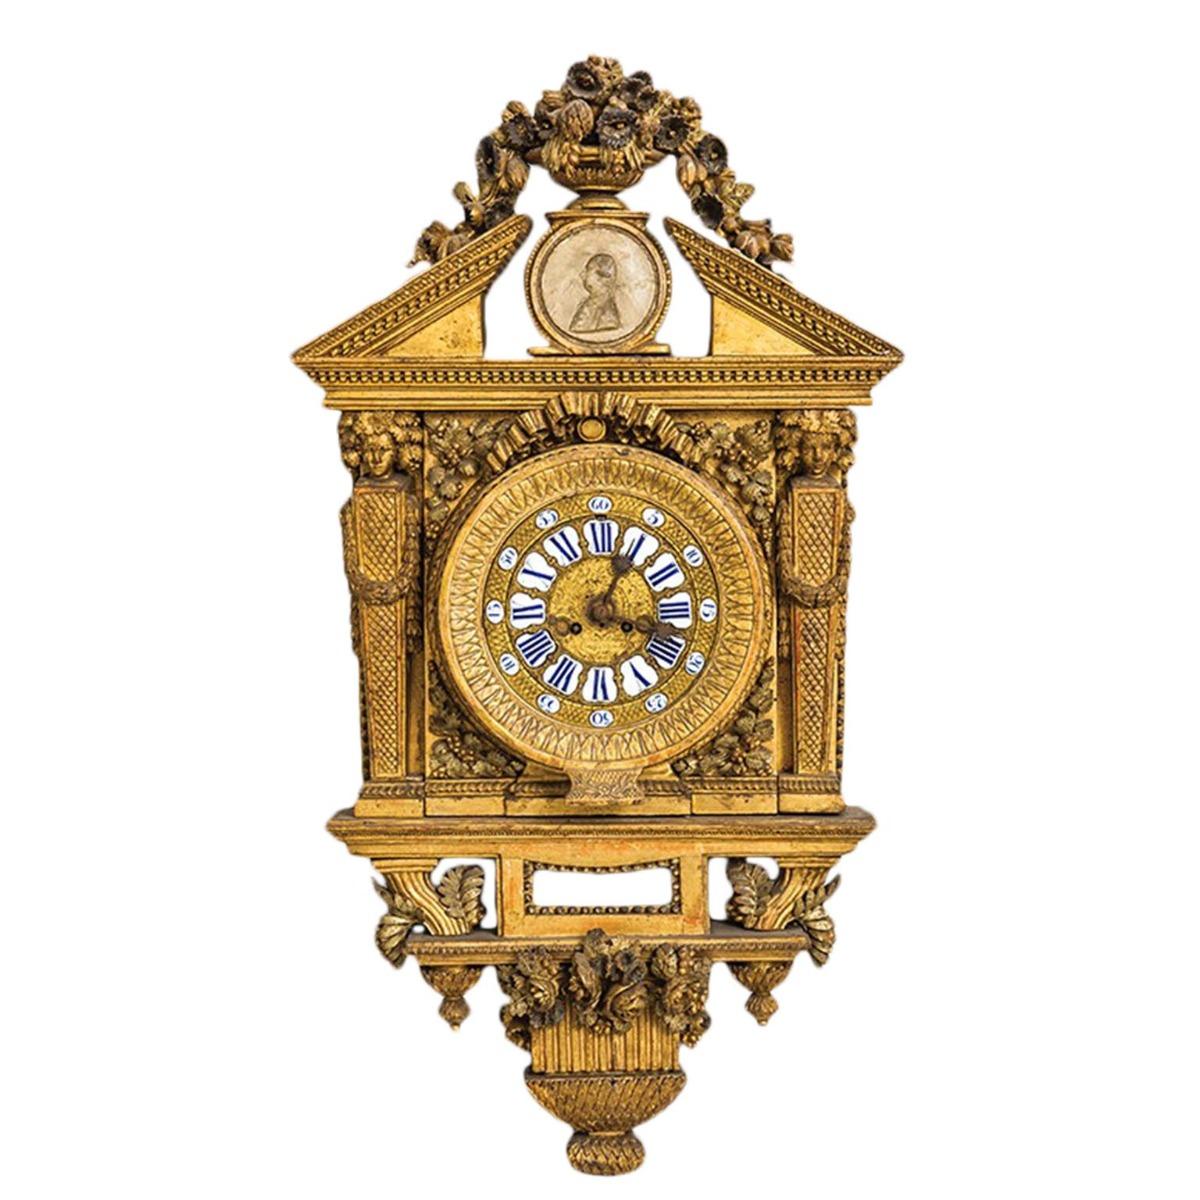 Italian ancient carved wooden gold-plated Cartel wall clock.
Signed, dated, and situated: Johannes Bapta Vivaldi Roma 1768.
Material and techniques: carved wood, giltwood
Place of origin: Rome
18th century.
 